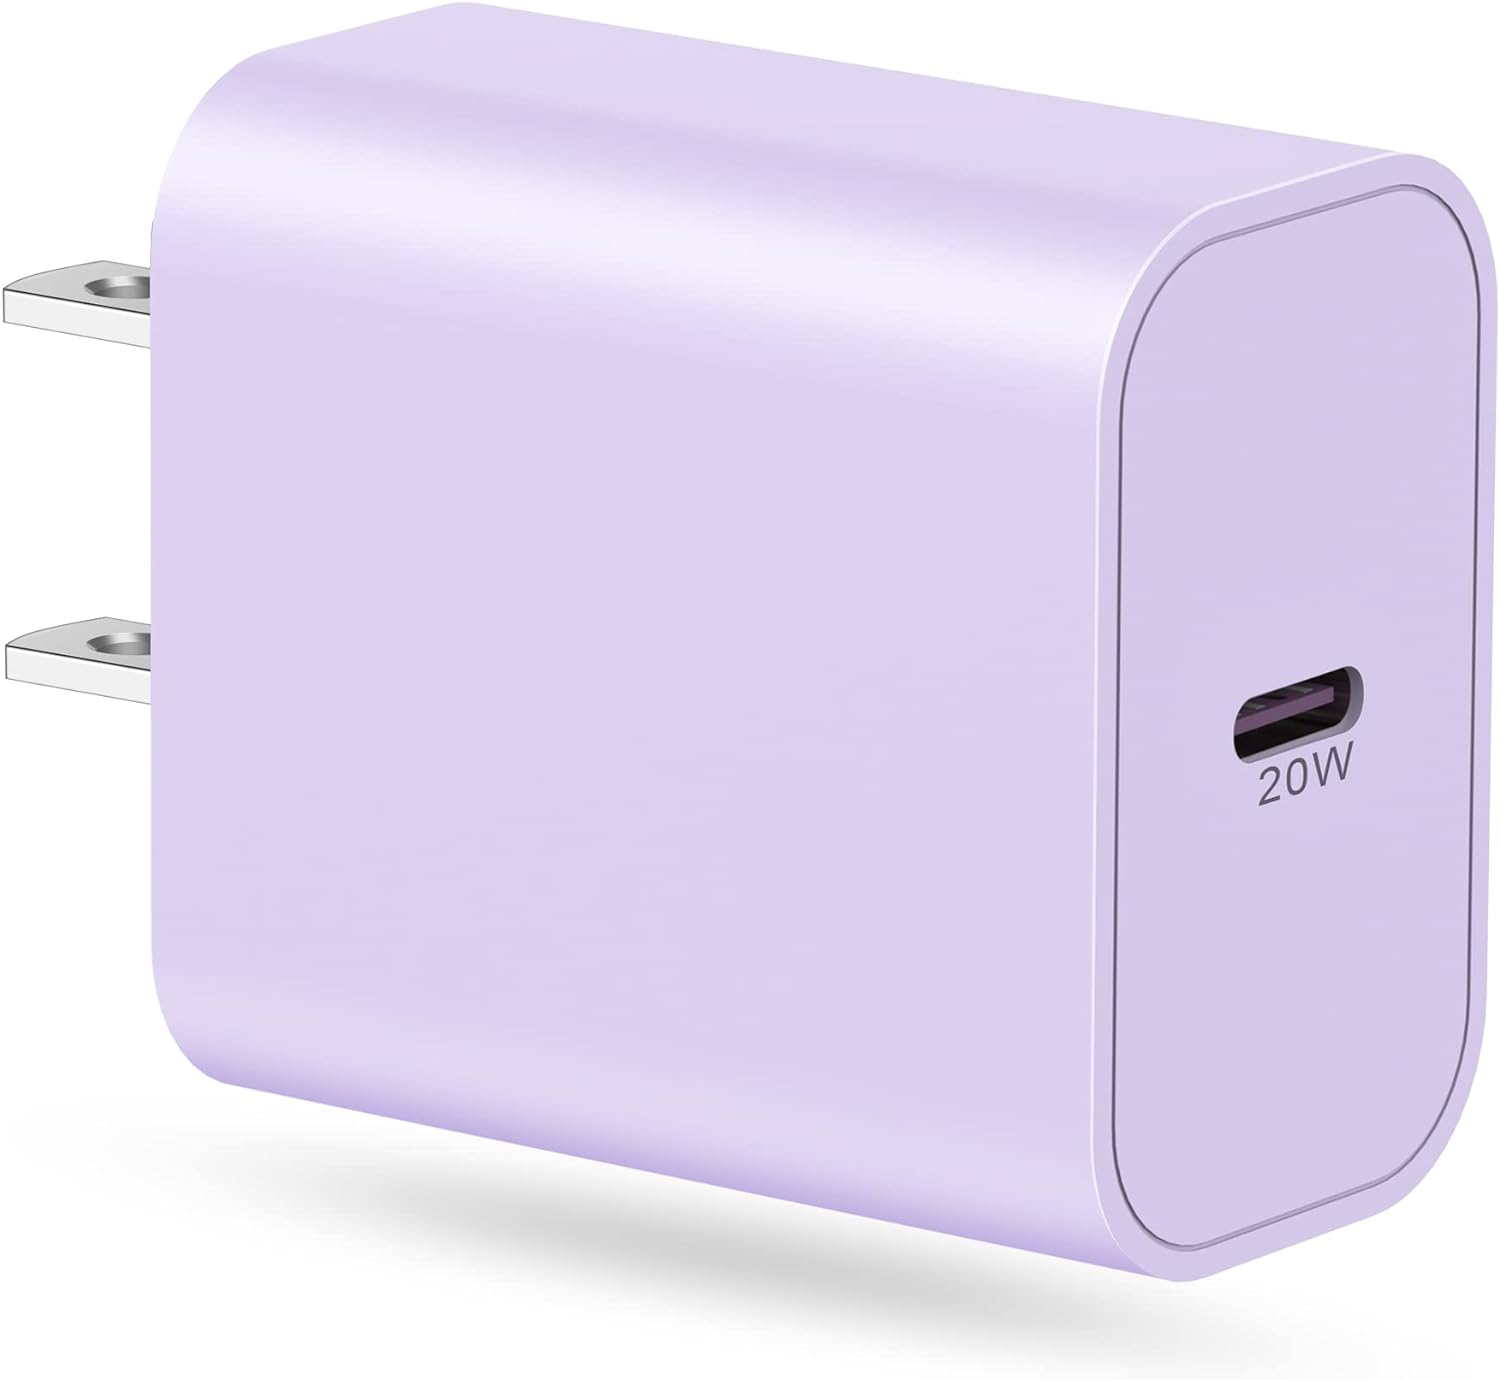 iPhone 15 14 13 12 11 USB C Wall Charger, 20W Fast Charging Block USBC Power Adapter PD Plug Box Type C Brick Cube for iPhone 15 14 13 12 11 Pro Max XS X XR SE 8 Plus, iPad Pro, AirPods Pro, Watch